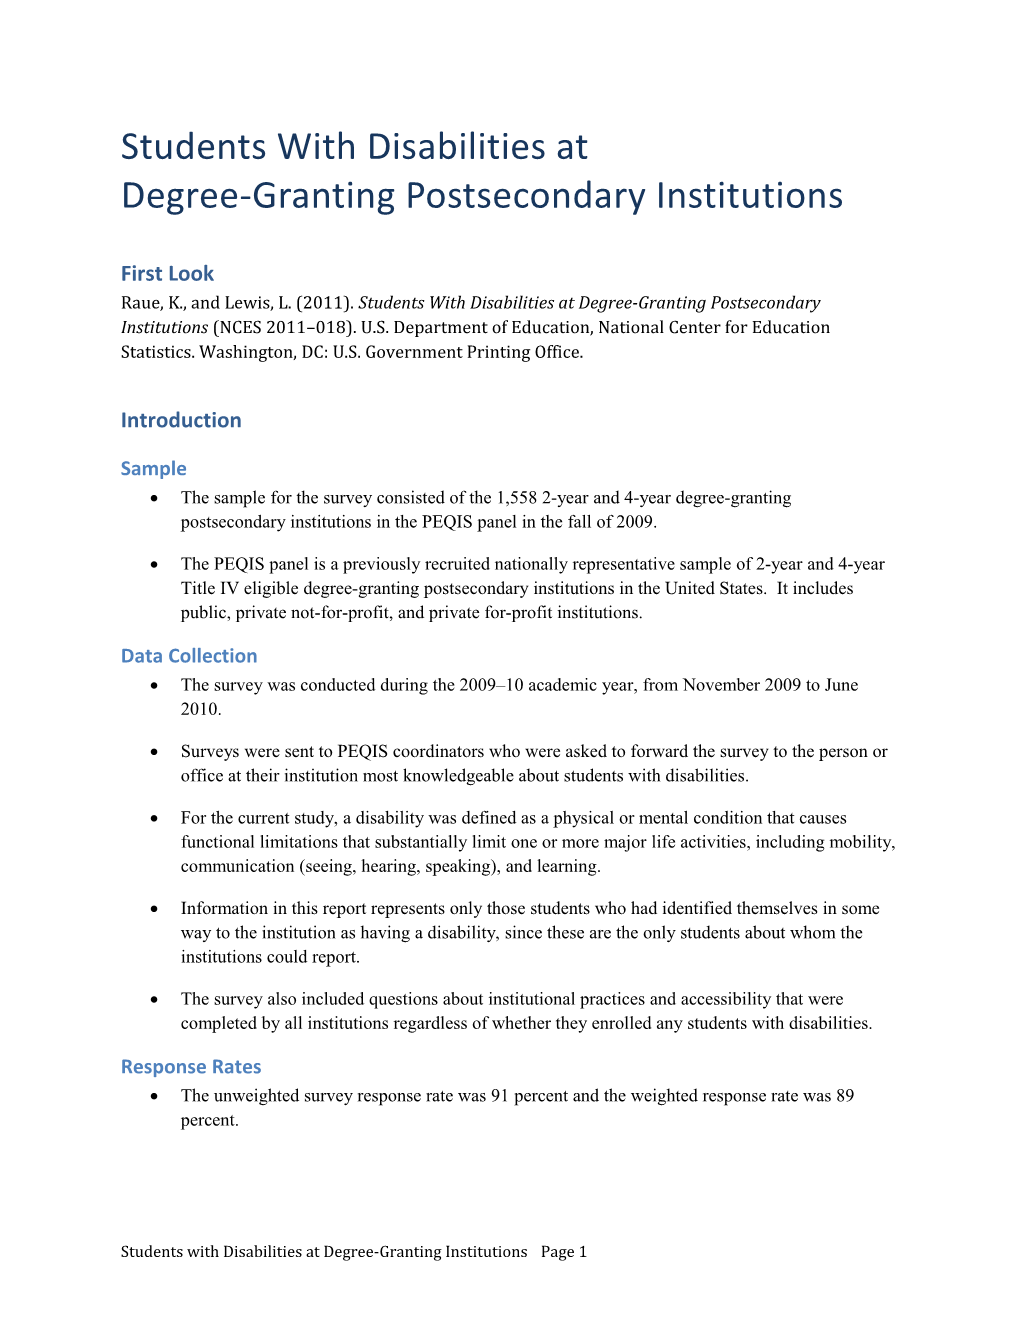 Presentation: Students with Disabilities at Degree-Granting Postsecondary Institutions